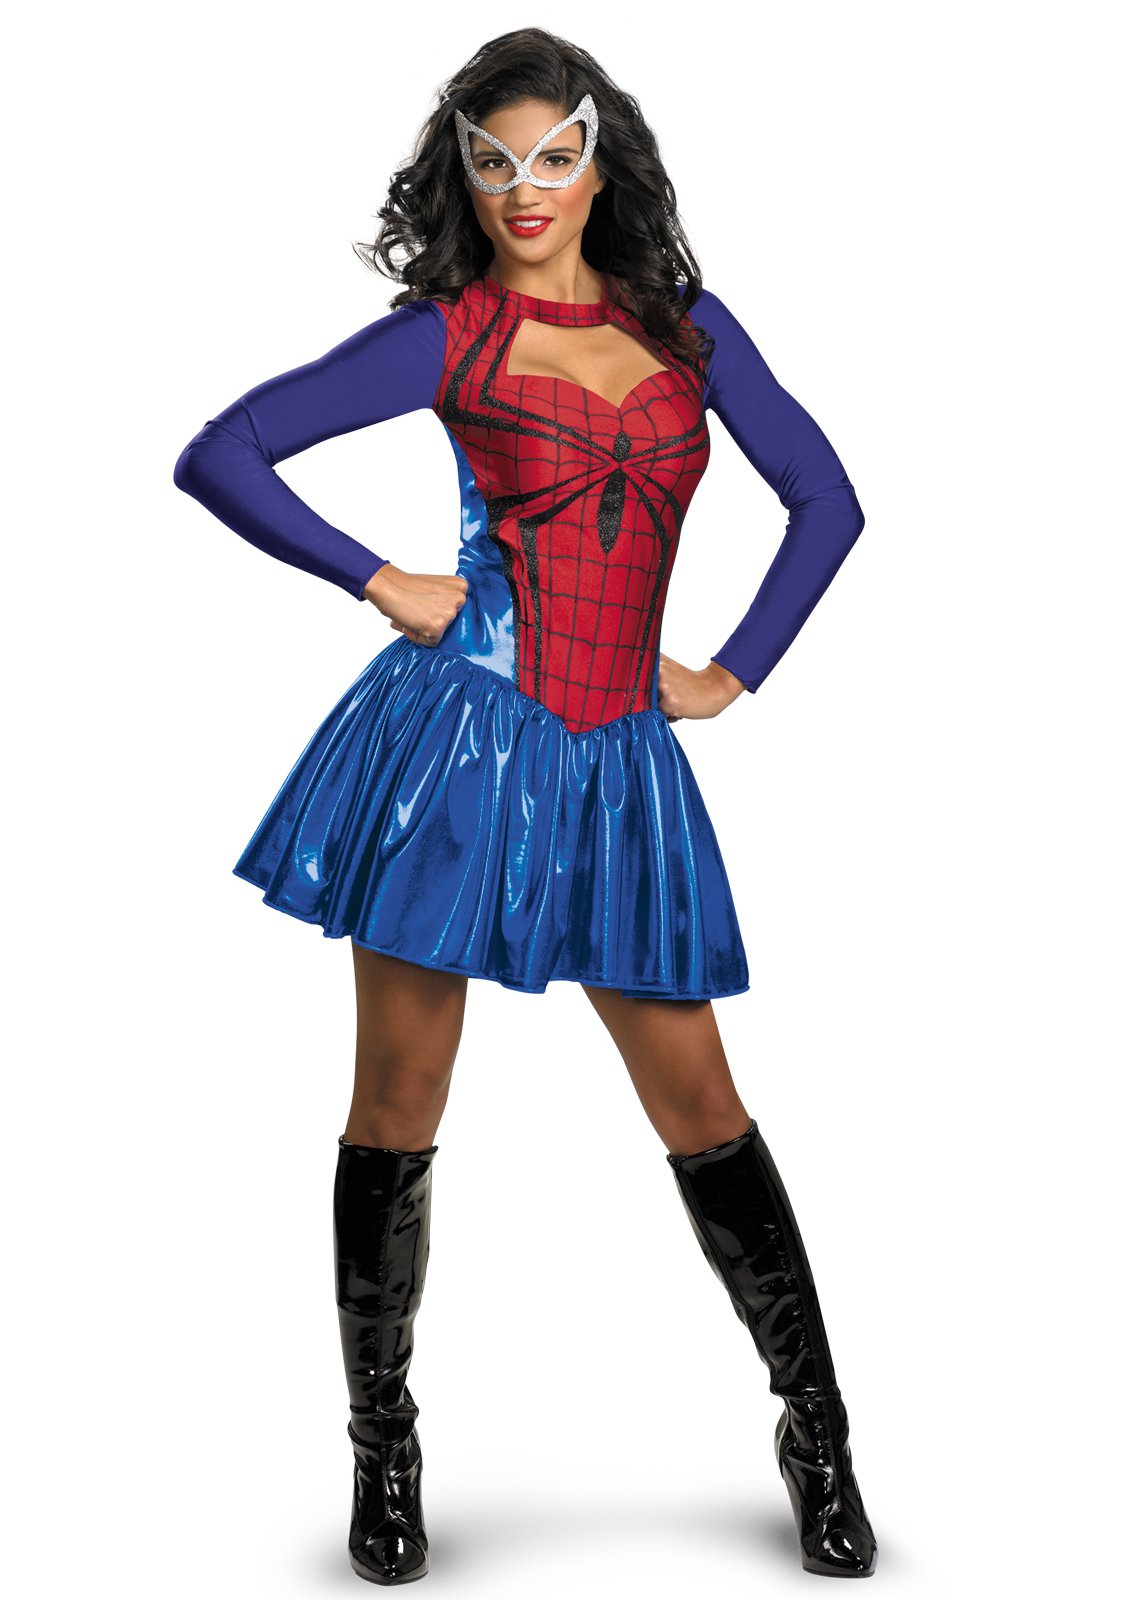 Spider - Girl Adult Costume